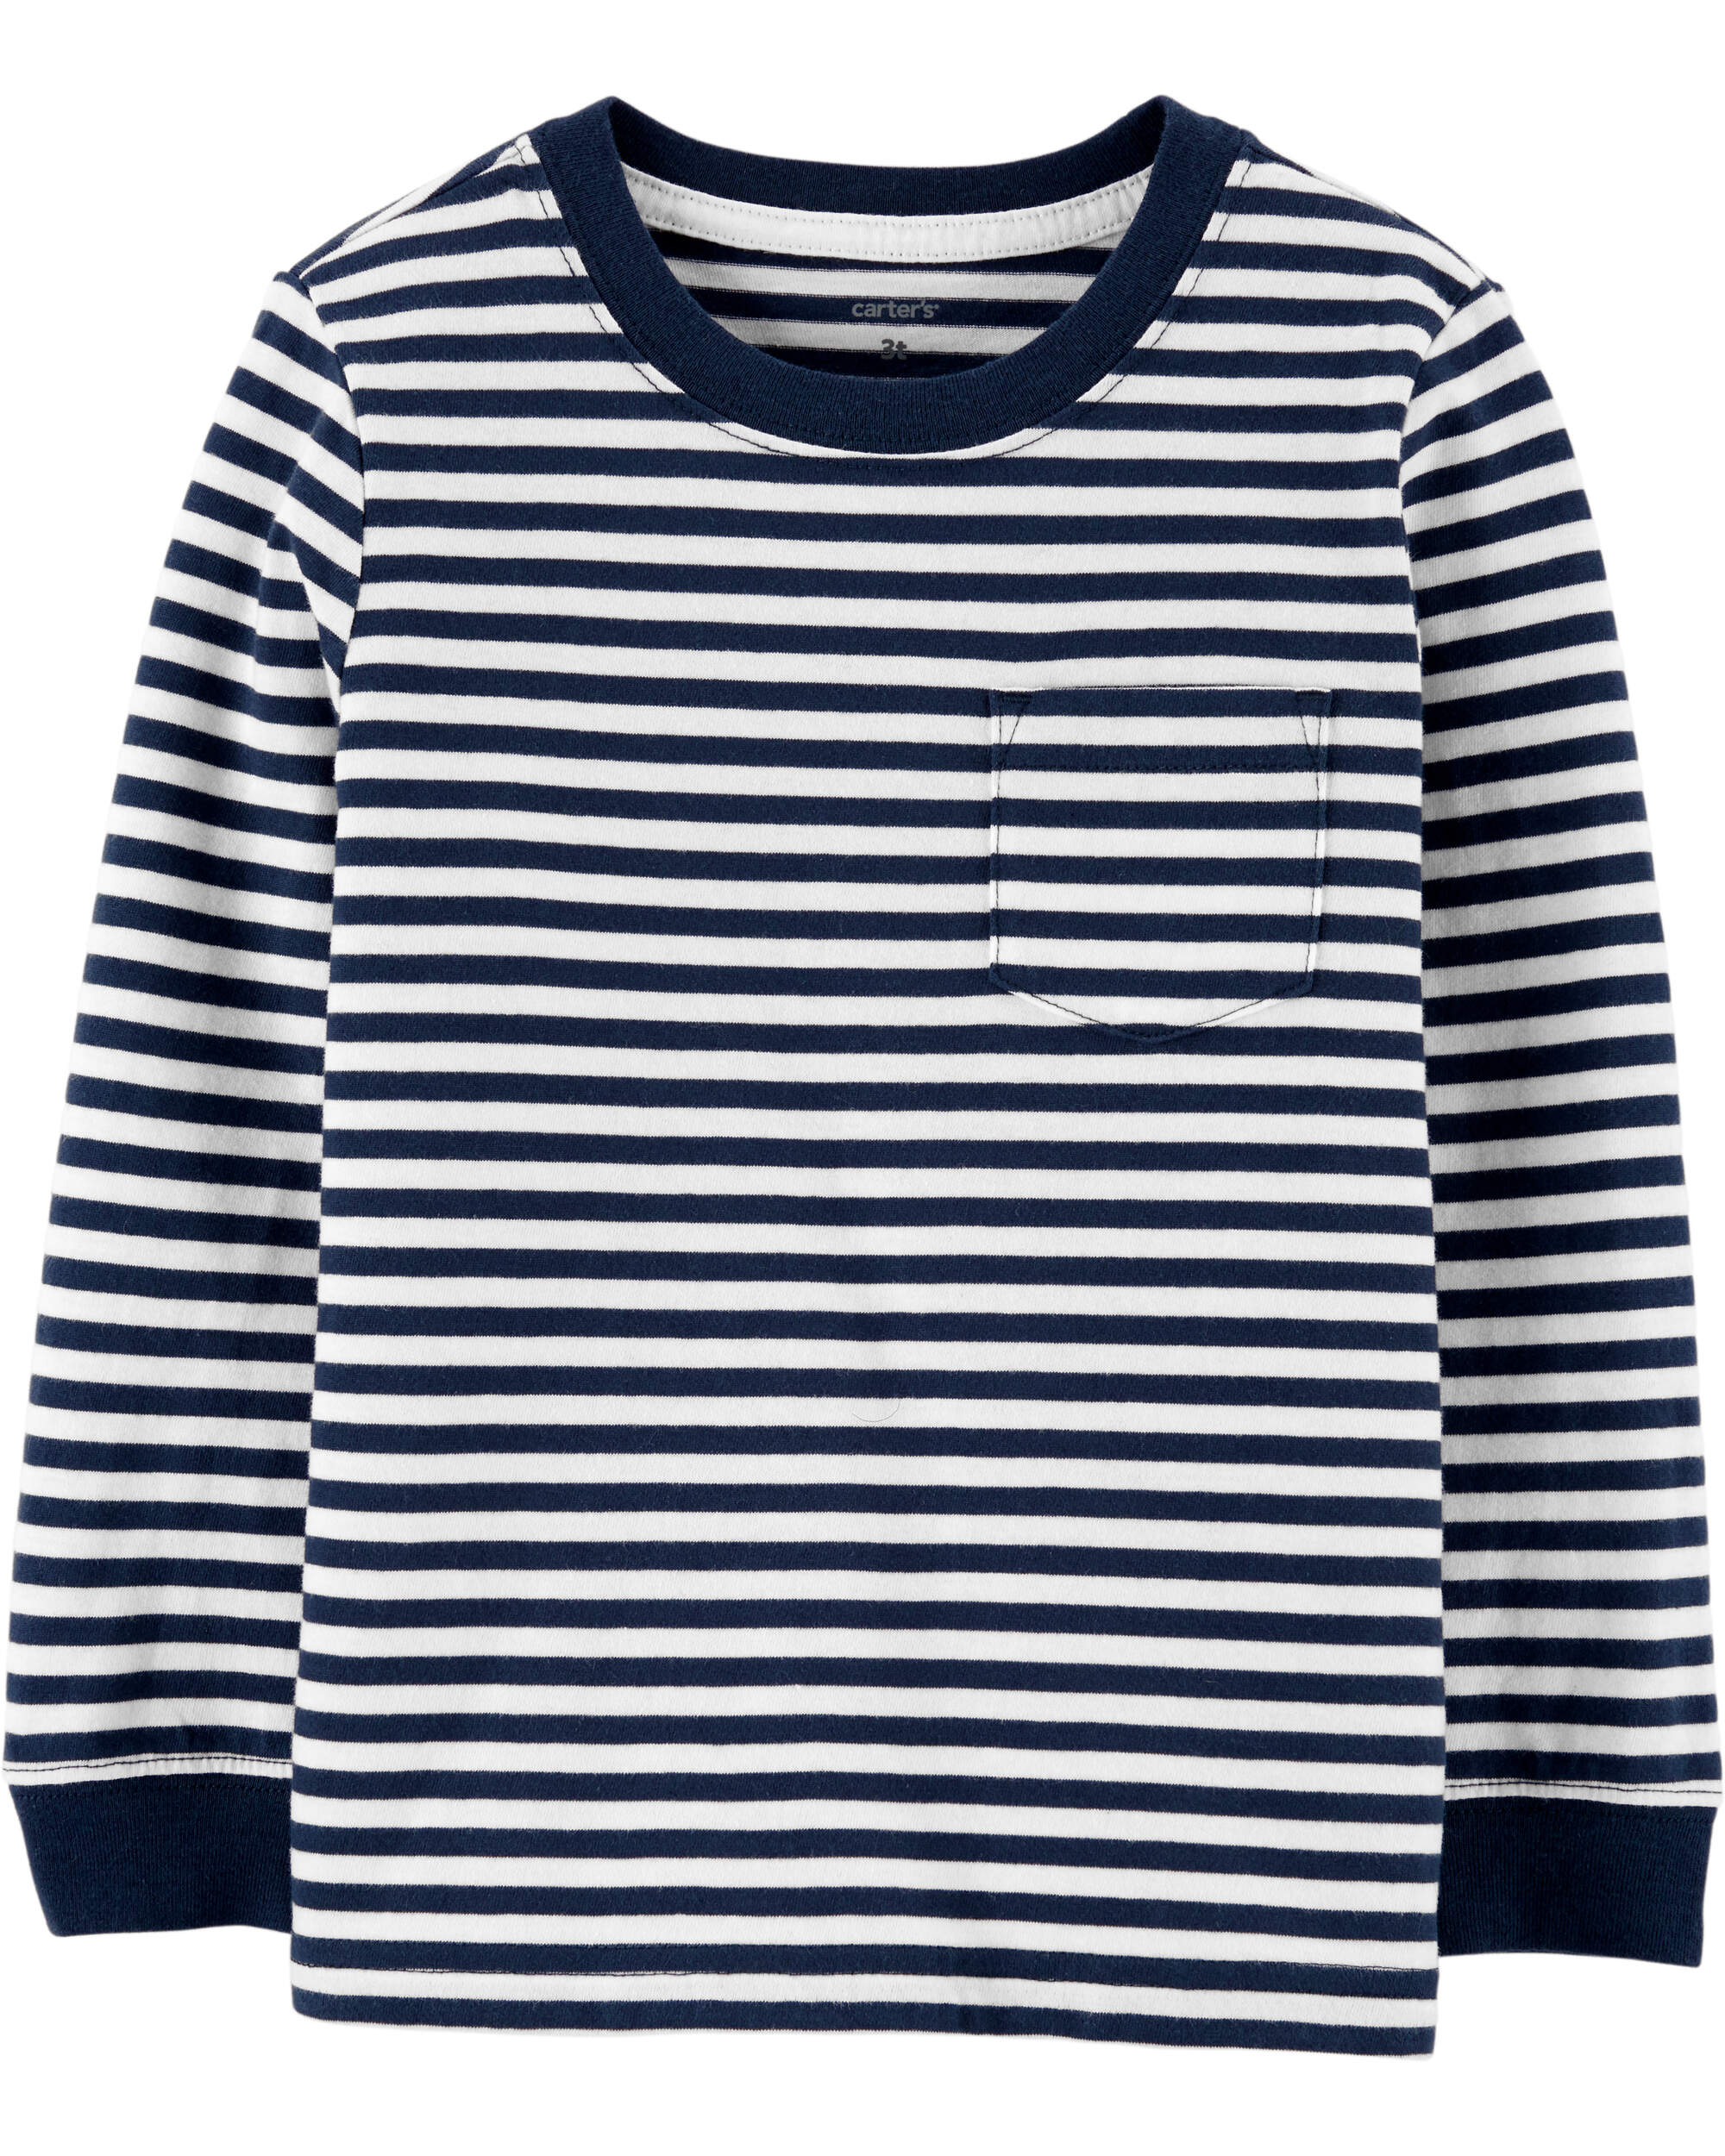 Navy/White Toddler Striped Pocket Jersey Tee | carters.com